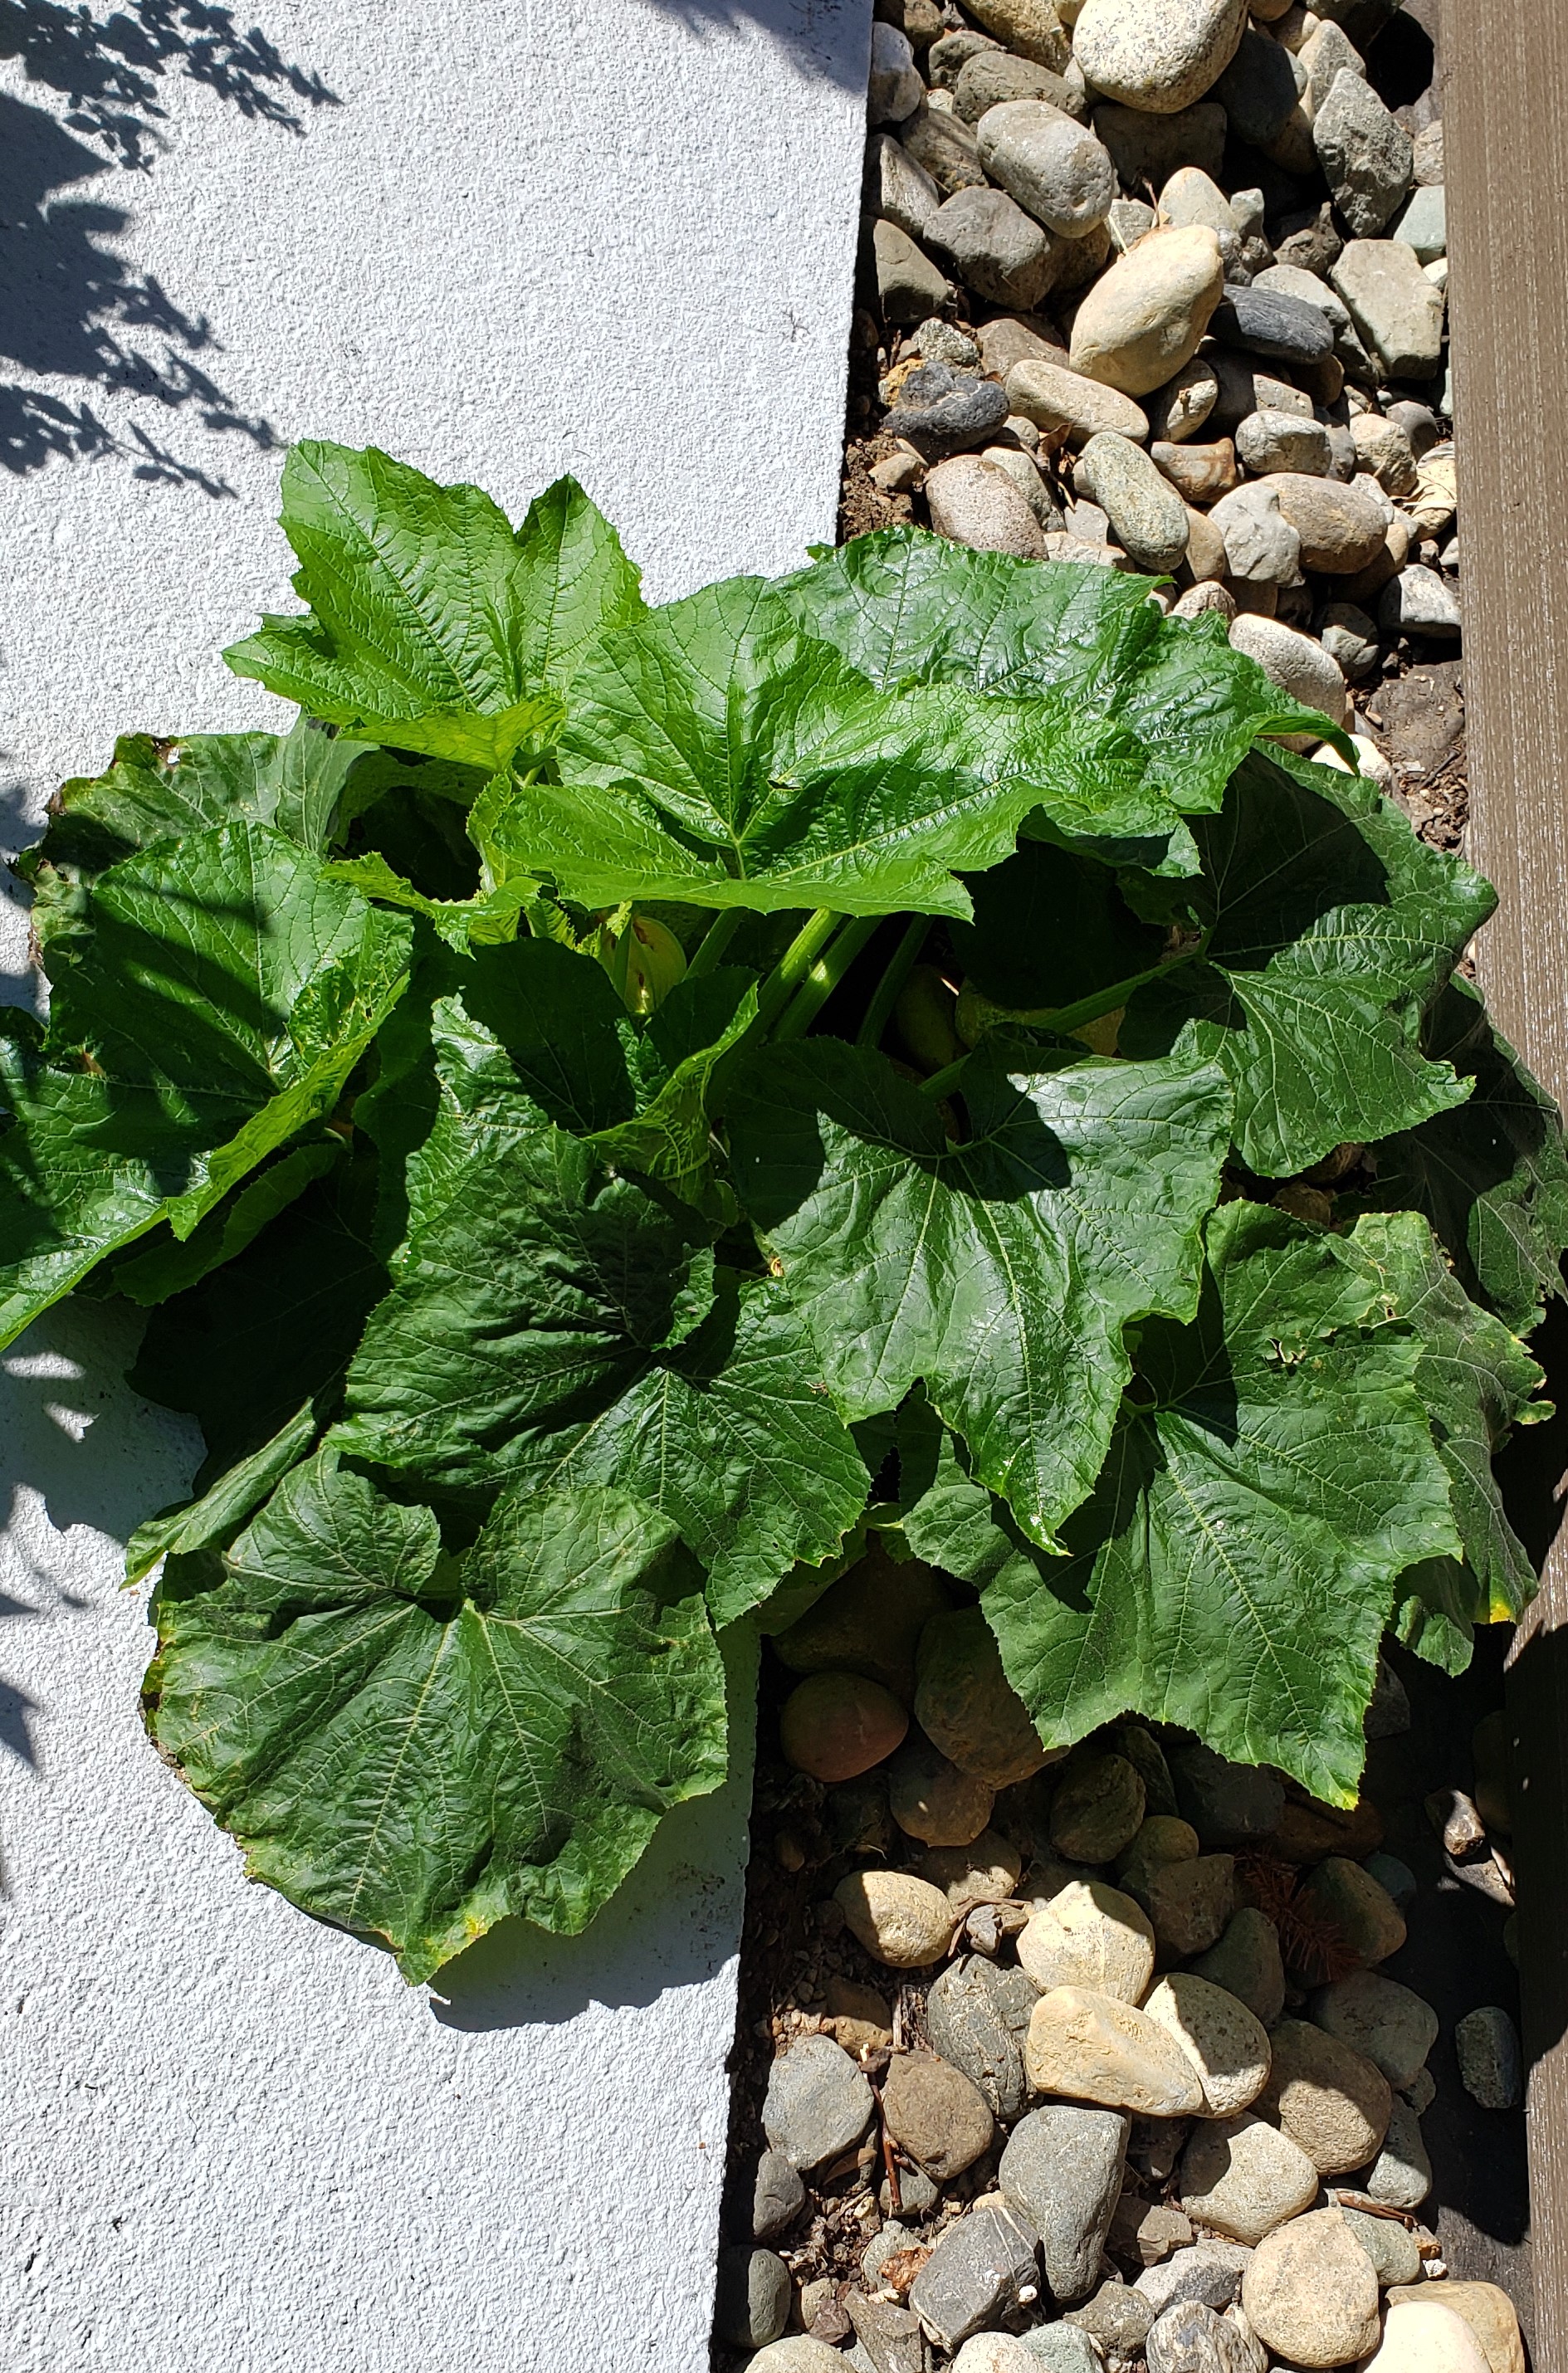 Aquaponic and Aquaculture growers should make bigger Zucchinis than me.